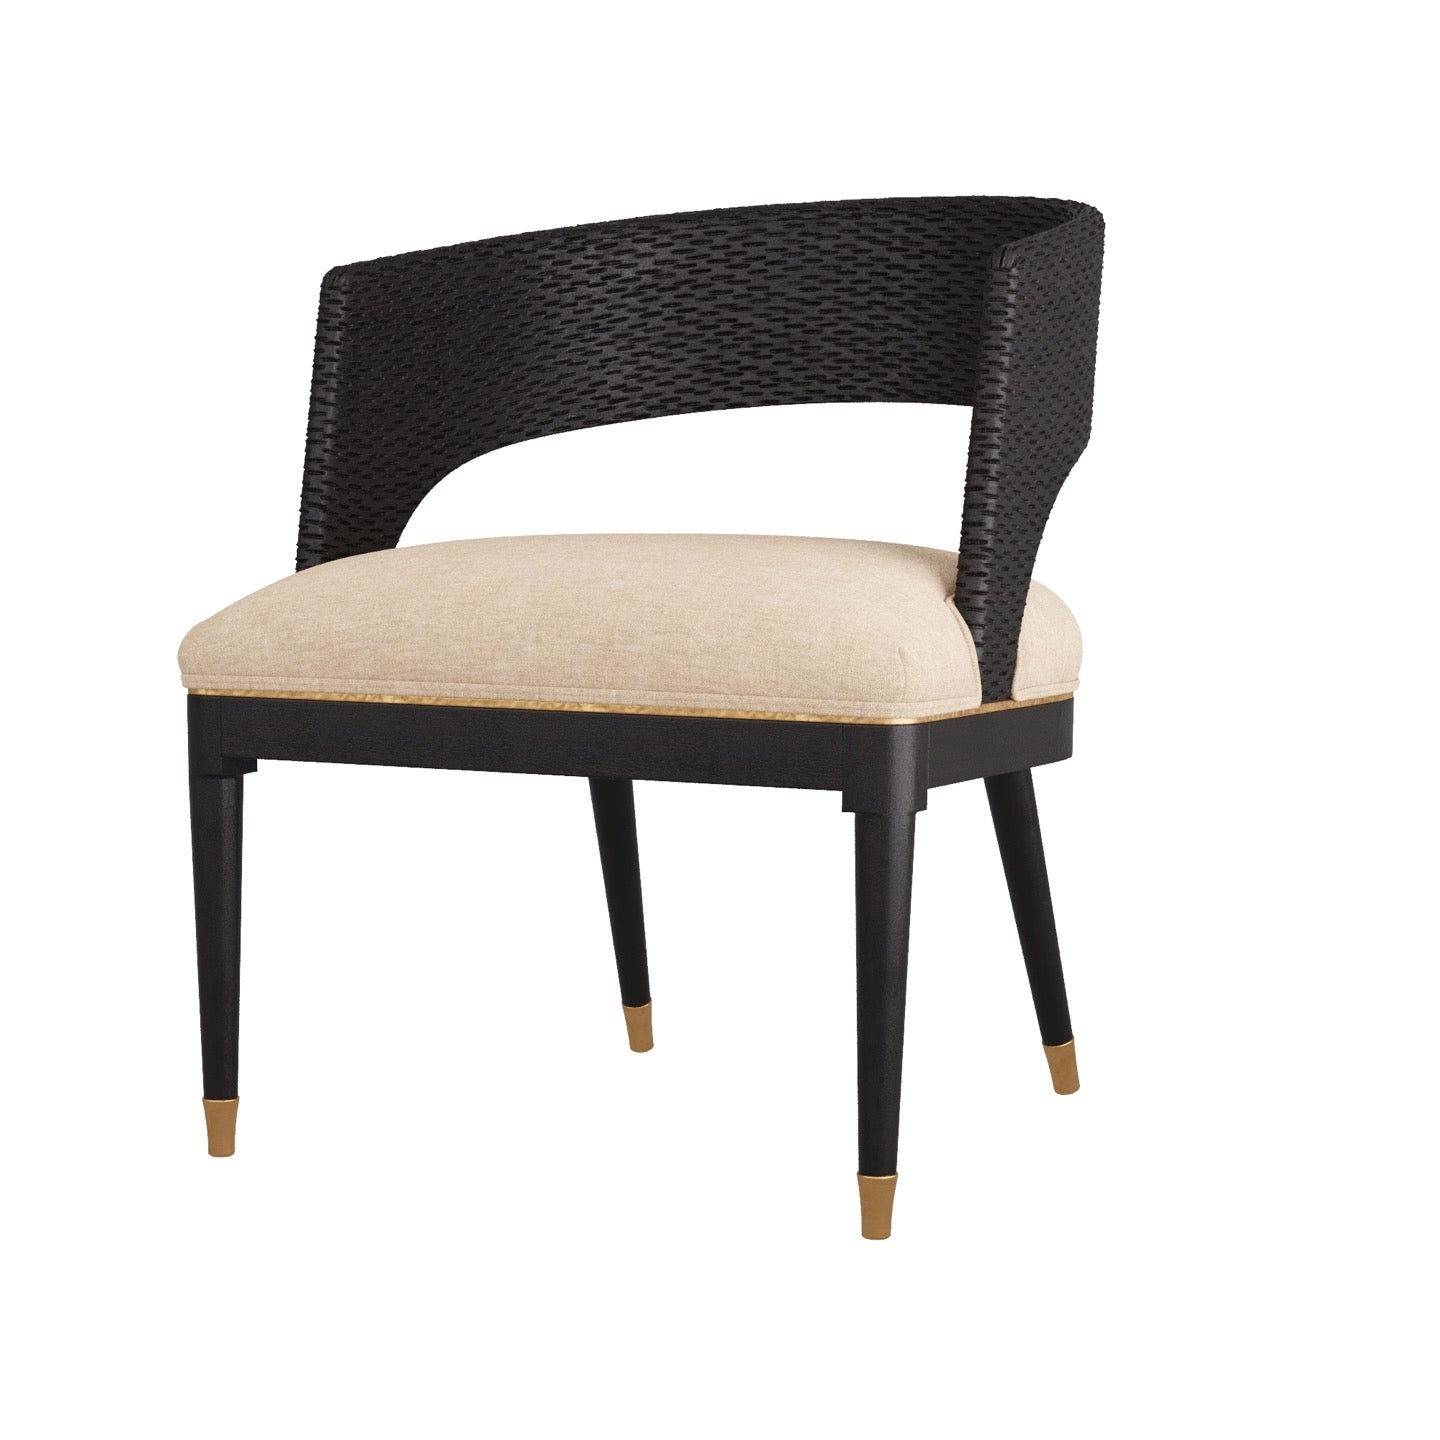 Swanson Dining Chair